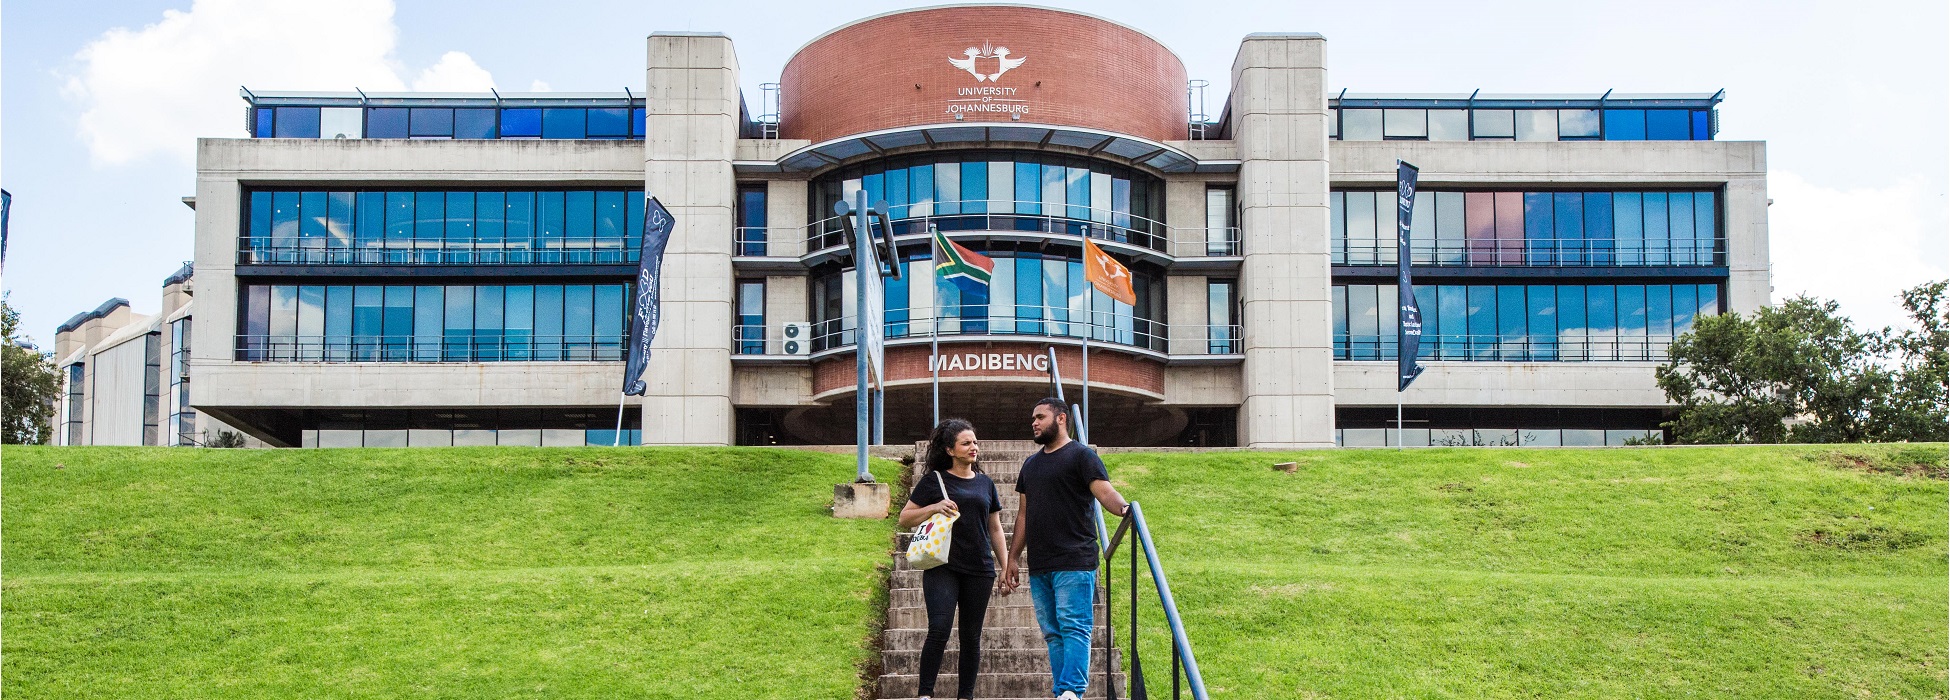 Uplifting Humanity! Study at the University of Johannesburg's Faculty of Humanities and Faculty of Health Sciences!